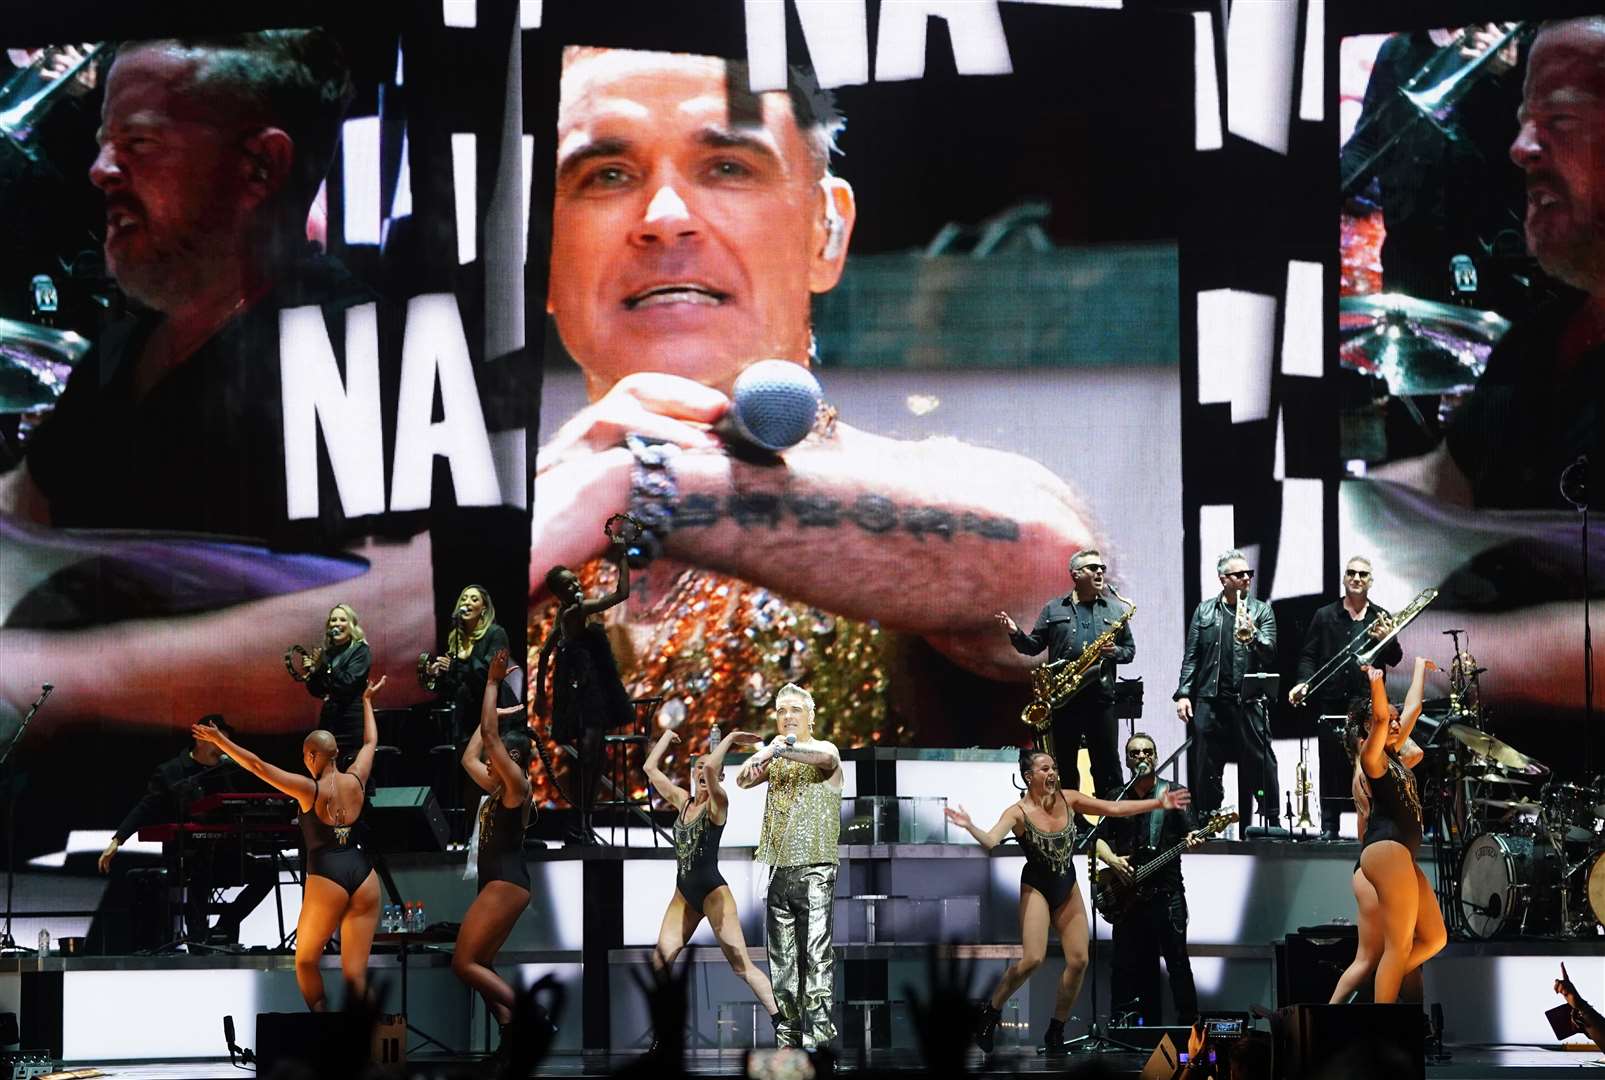 Robbie Williams performs at The O2 Arena in London (Ian West/PA)